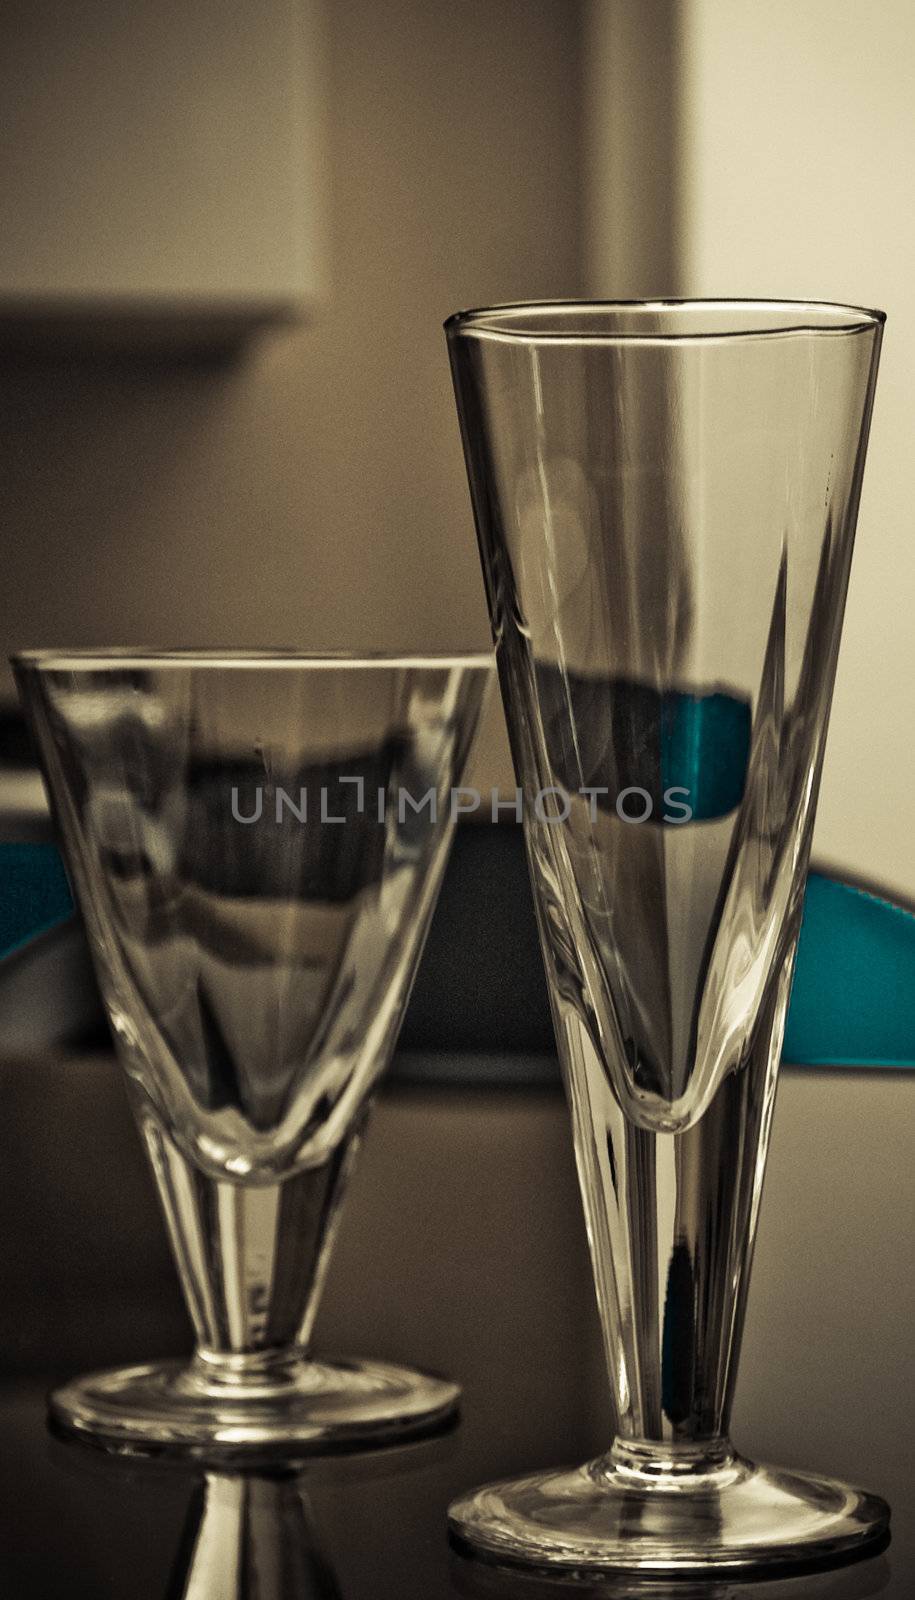 Modern glasses and plates on the glass table with light soft